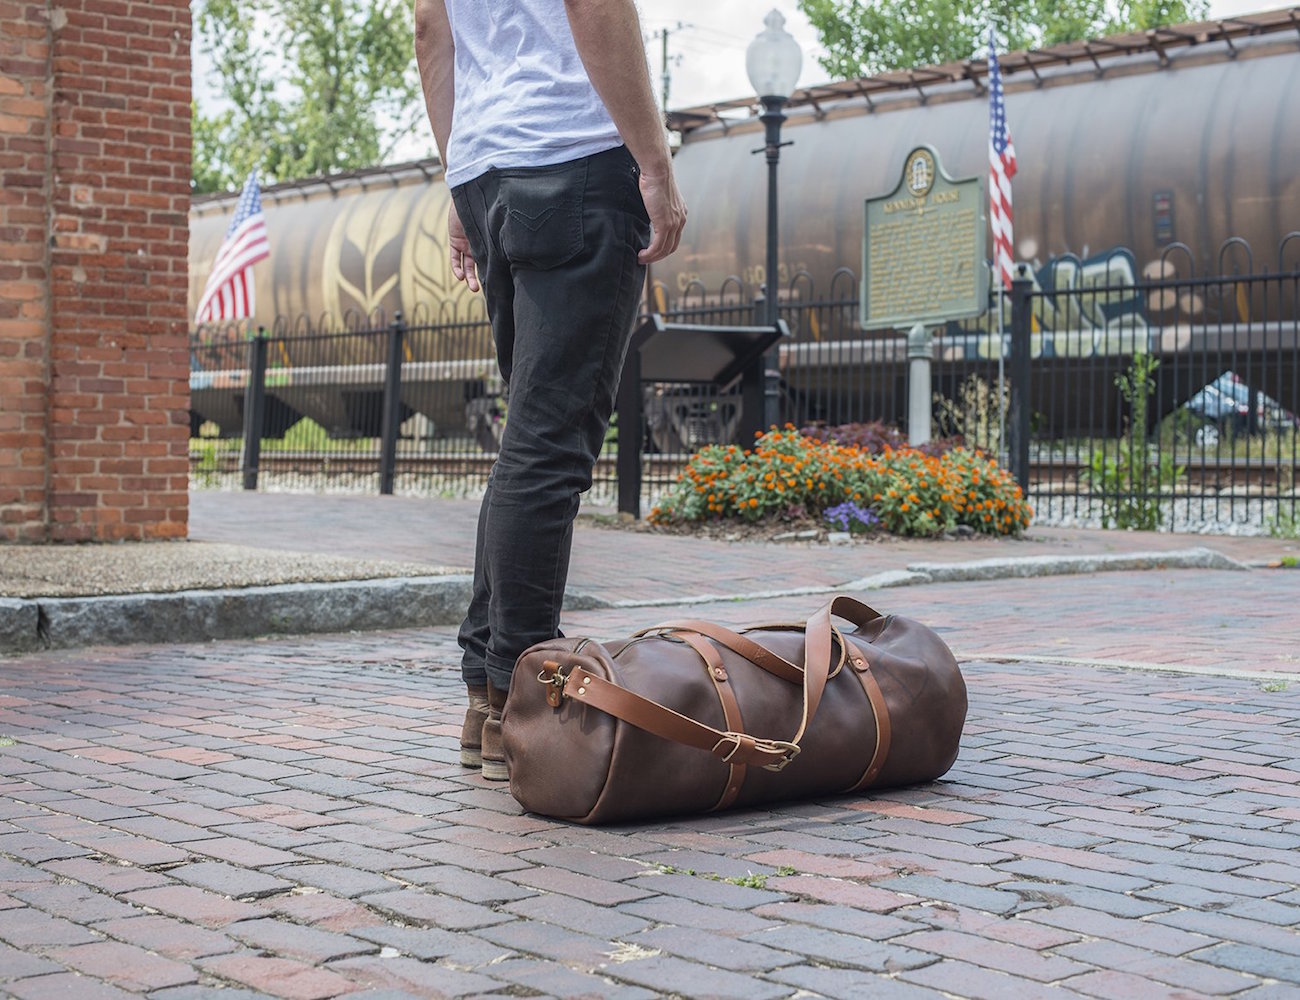 The William Duffle by Go Forth Goods